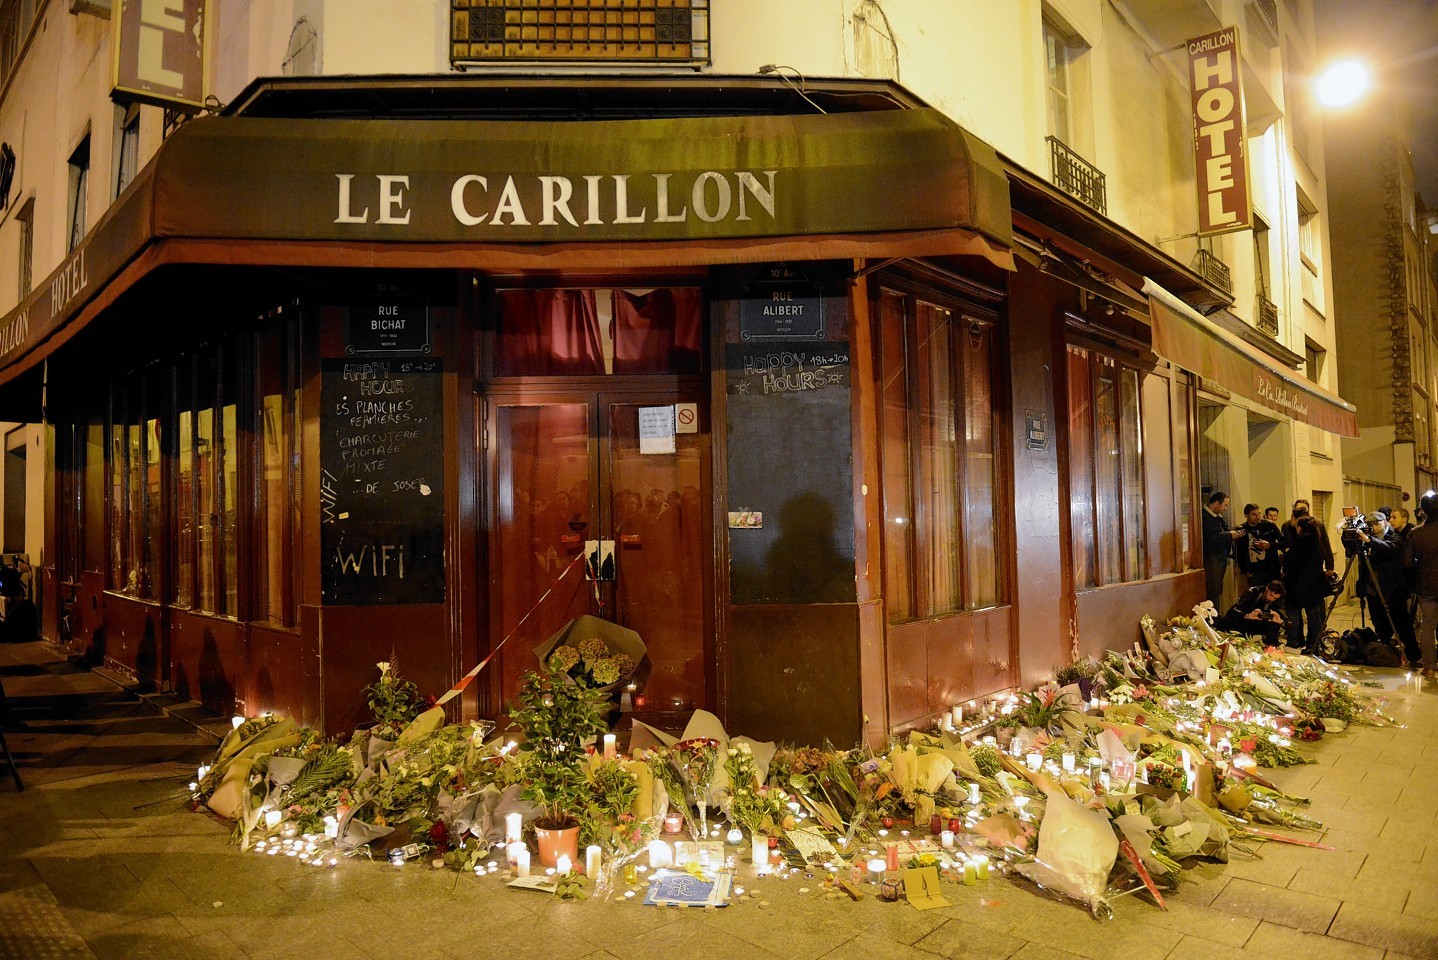 Flowers and candles have been placed outside Le Carillon bar, where some of the attacks were carried out